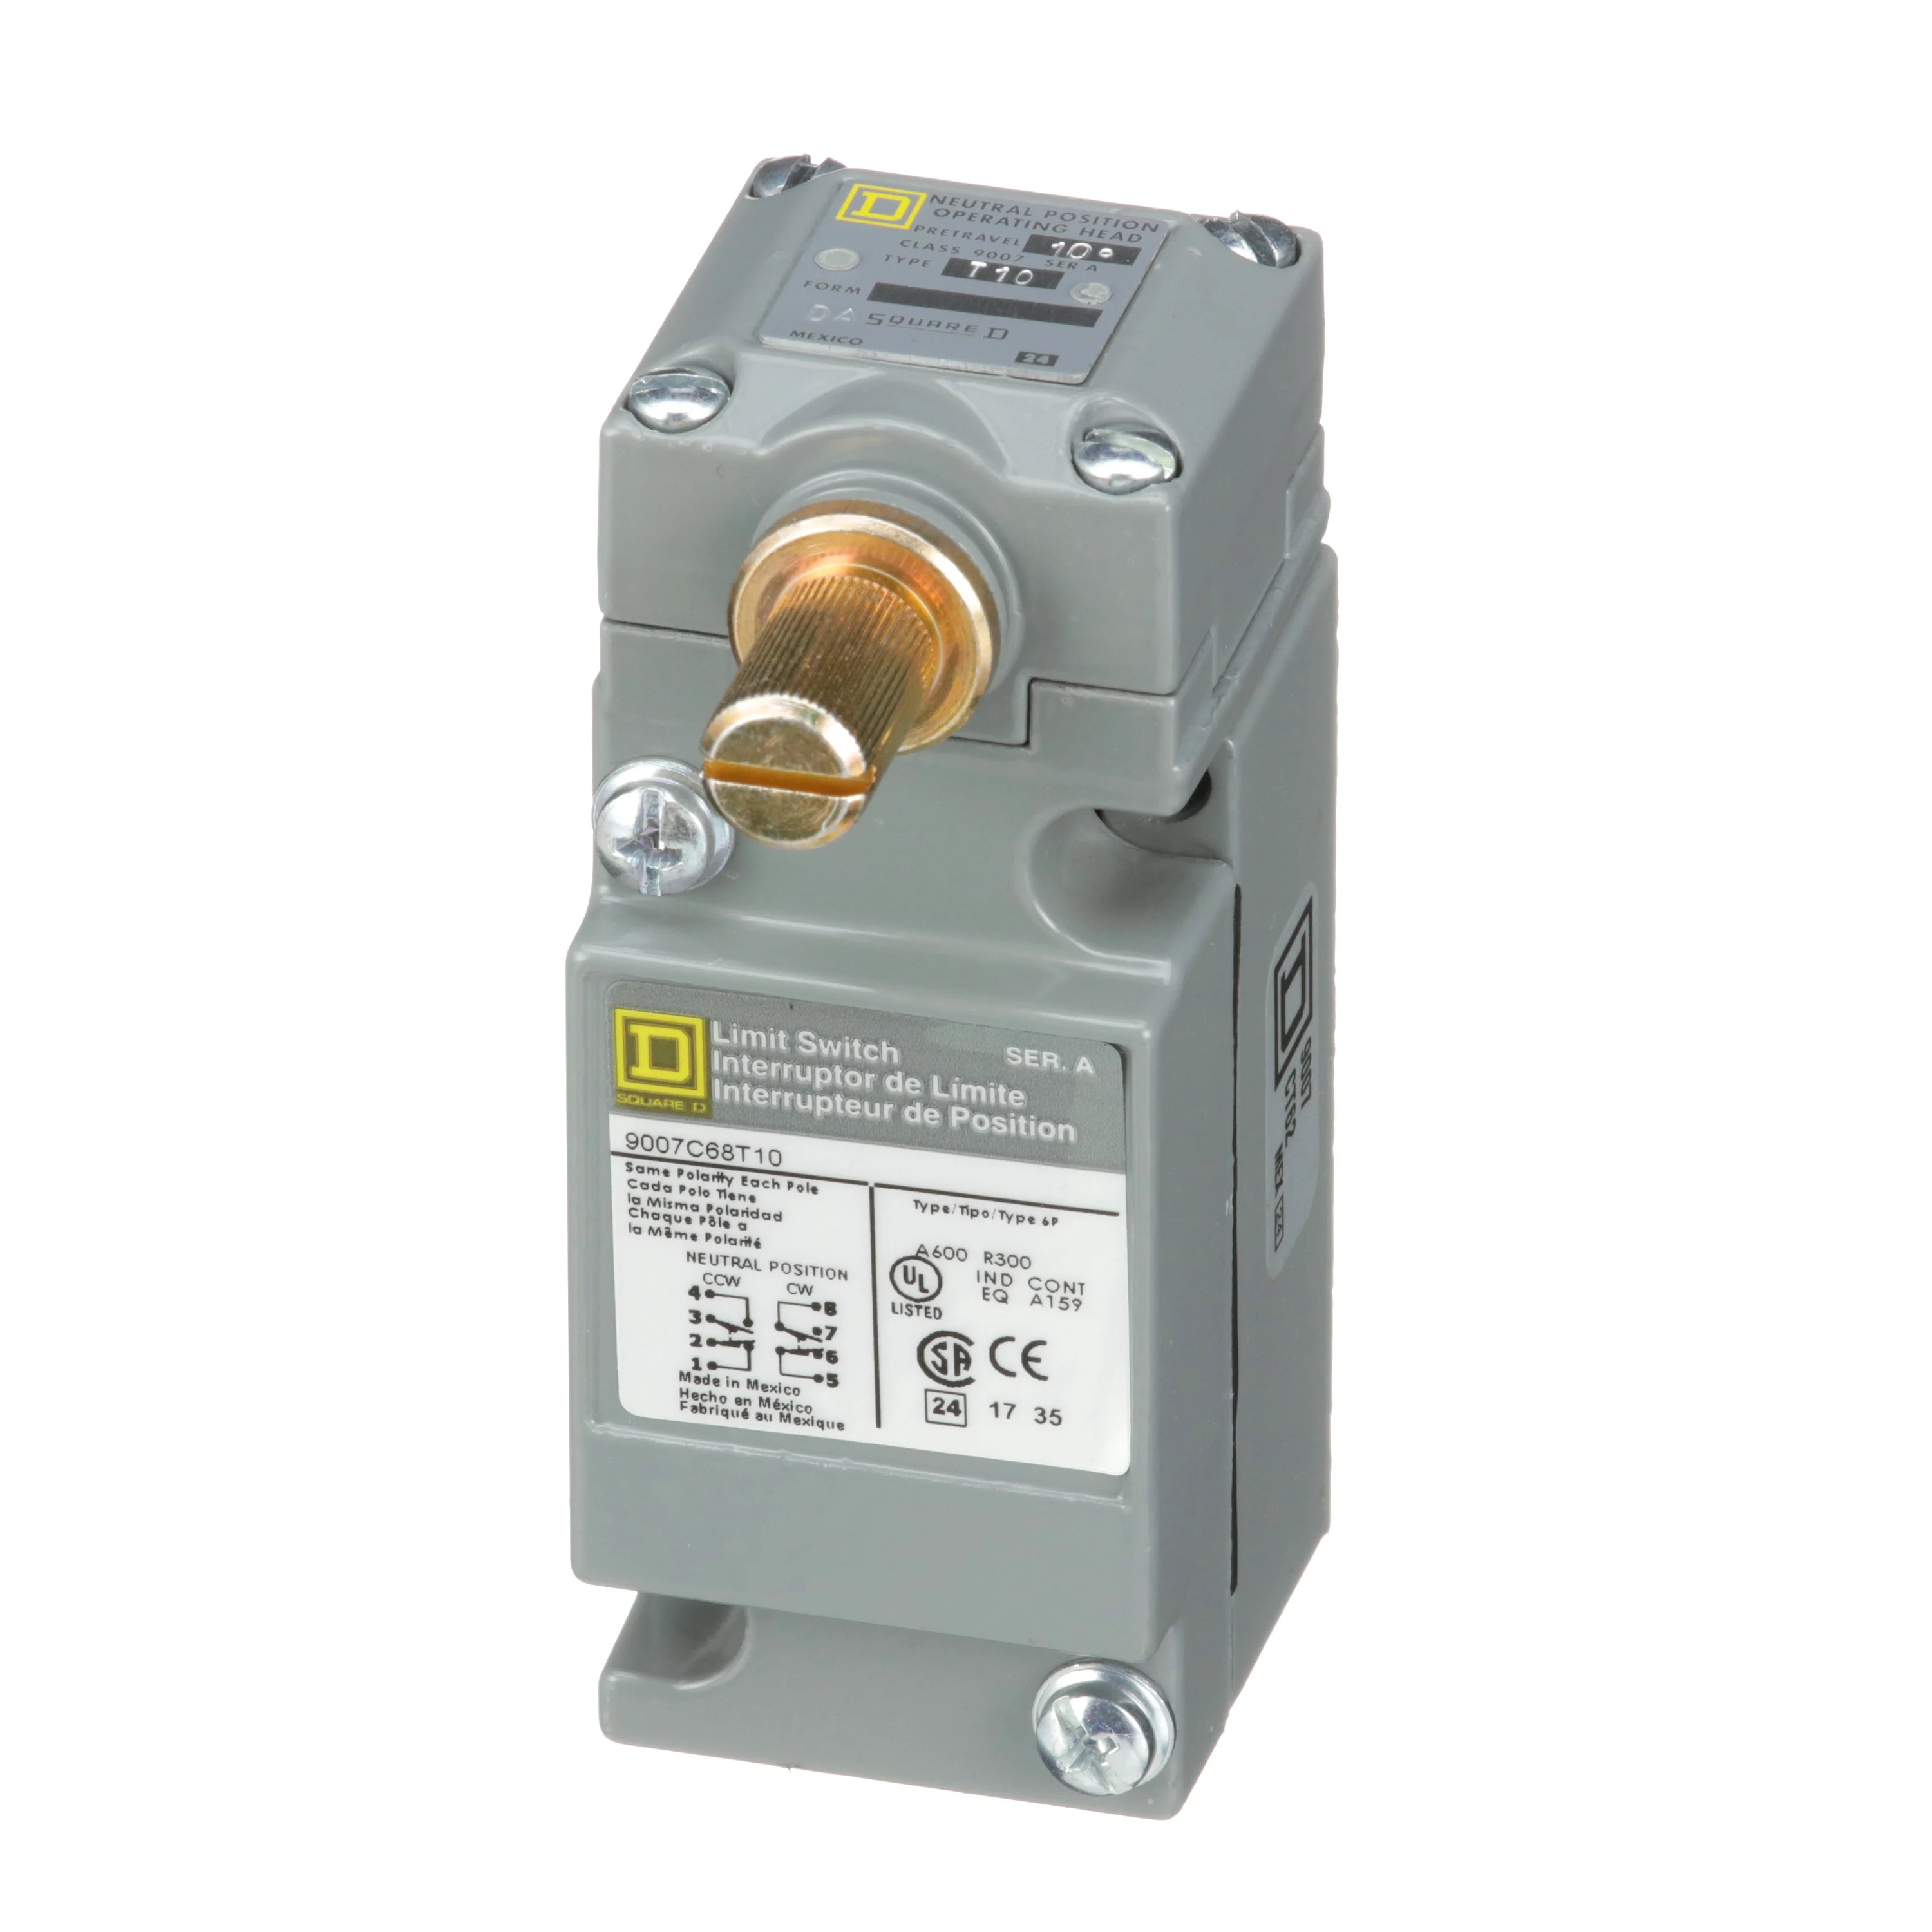 9007C68T10 | Schneider Electric Heavy Duty Rotary Limit Switch Snap Action 2NC-2NO, 9007C Series